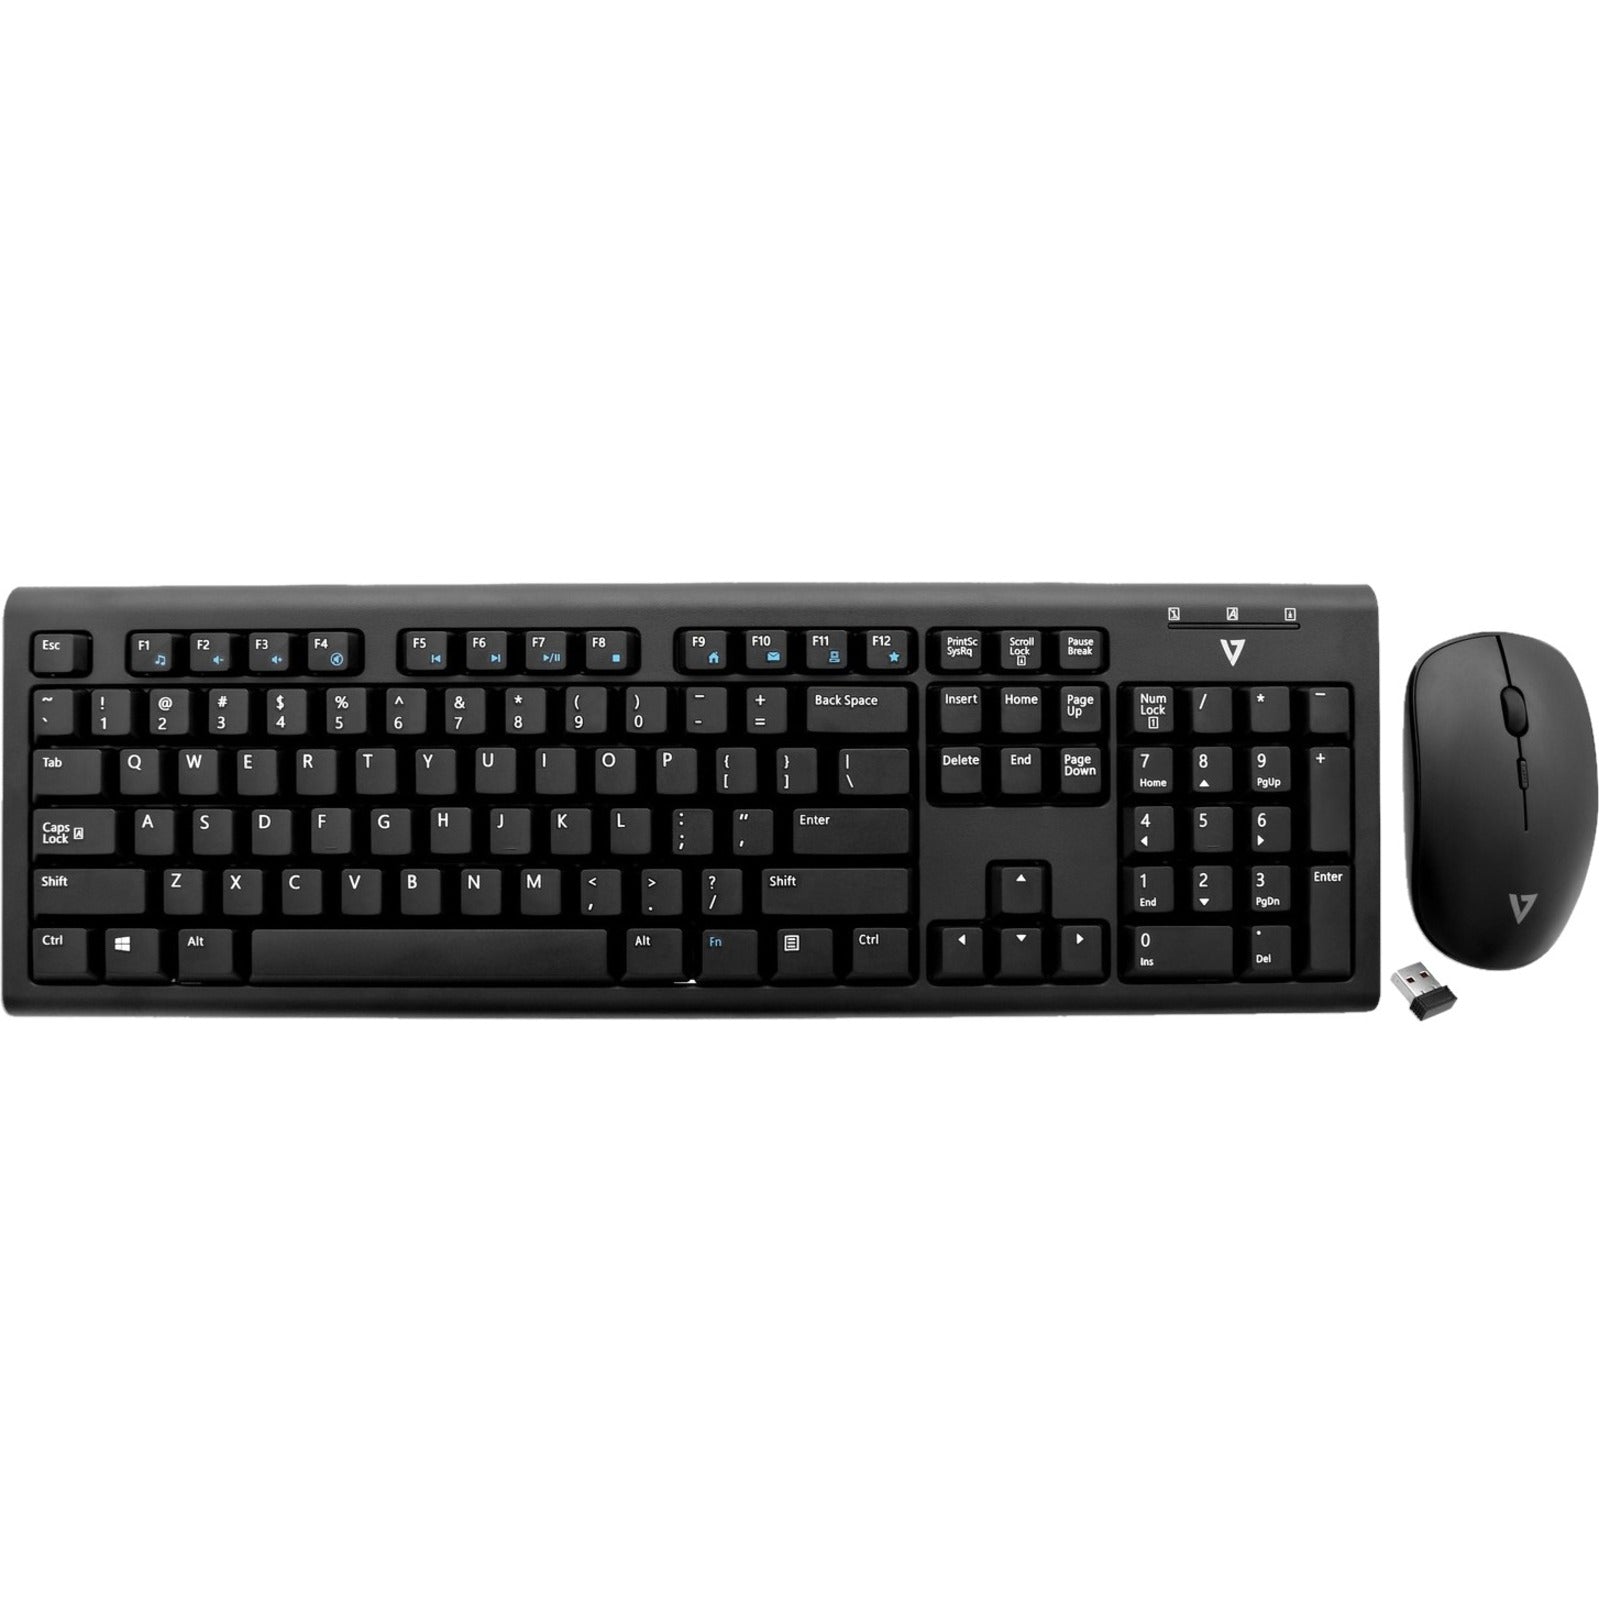 V7 CKW200US Wireless Keyboard and Mouse Combo, Spill Resistant, Adjustable Feet, 30 ft Wireless Range